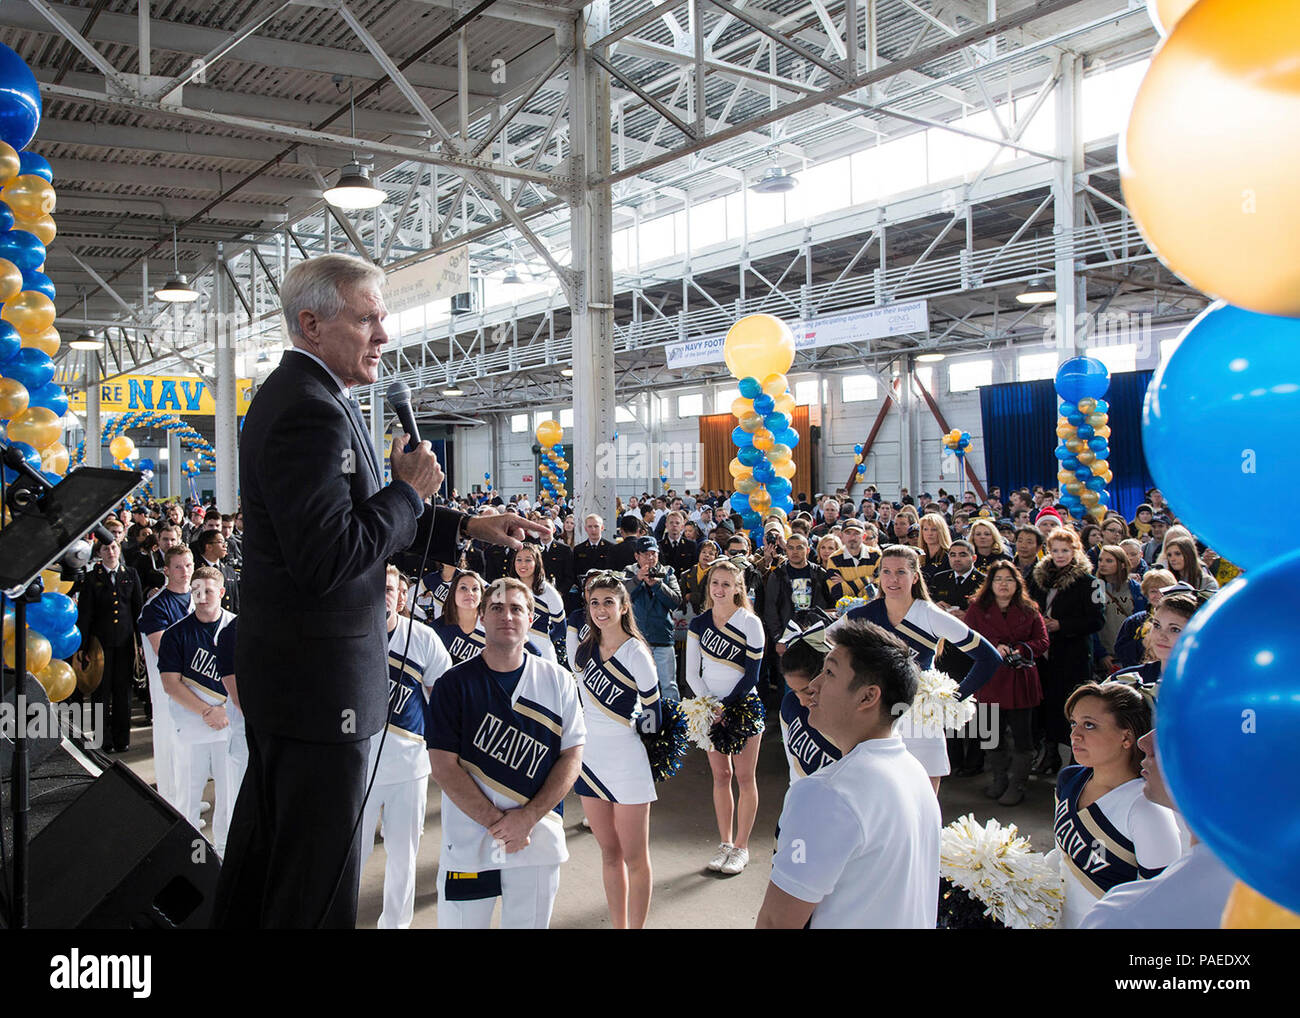 SAN FRANCISCO (Dec. 29, 2012) Secretary of the Navy (SECNAV) the Honorable Ray Mabus speaks to the U.S. Naval Academy cheerleading squad and the Navy mascot, 'Bill the Goat,' during a pep rally for the Kraft Fight Hunger Bowl game between the U.S. Naval Academy and Arizona State at AT&T Park, San Francisco, California. Arizona State defeated Navy 62-28. Stock Photo